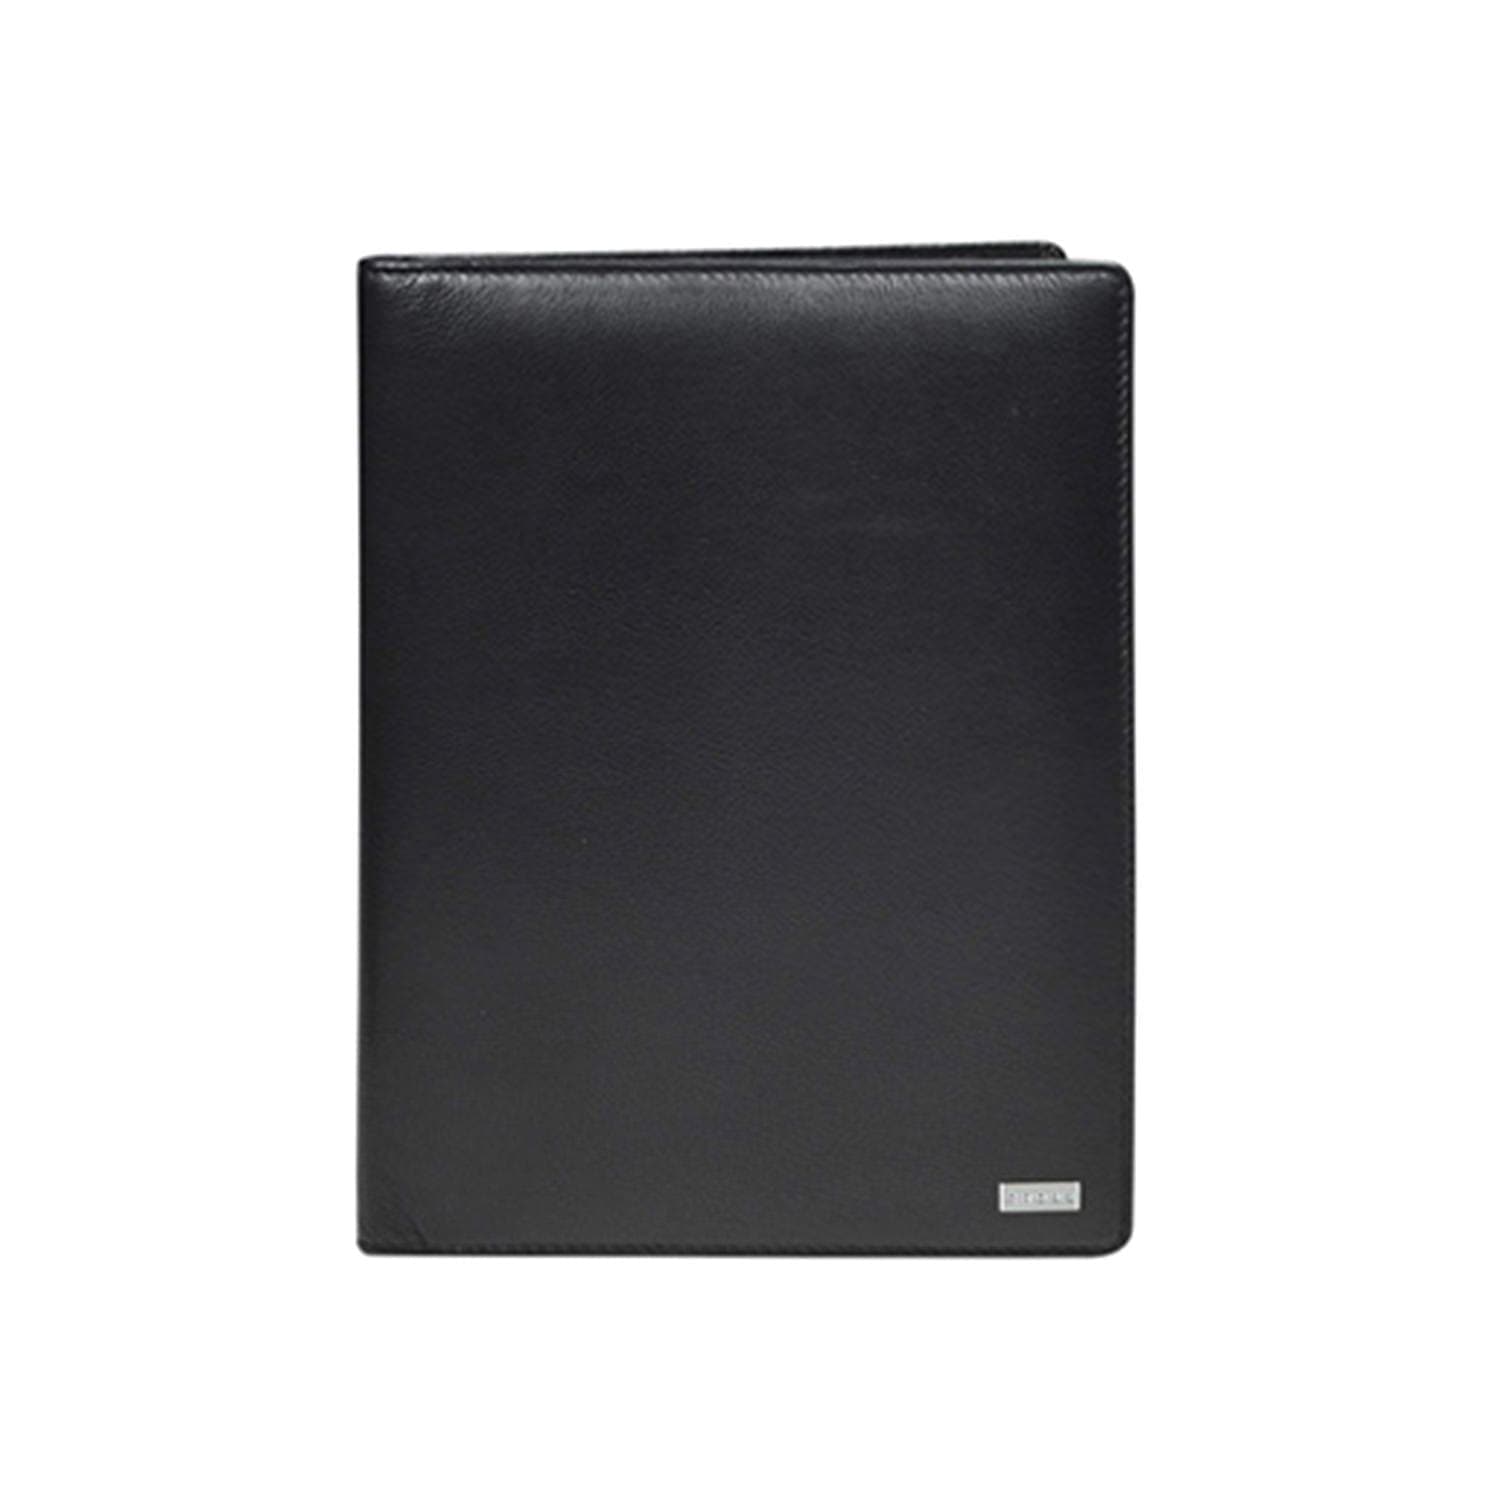 Cross A5 Planner with Cross Leather Agenda Pen - Black - AC248329B-1 - Jashanmal Home